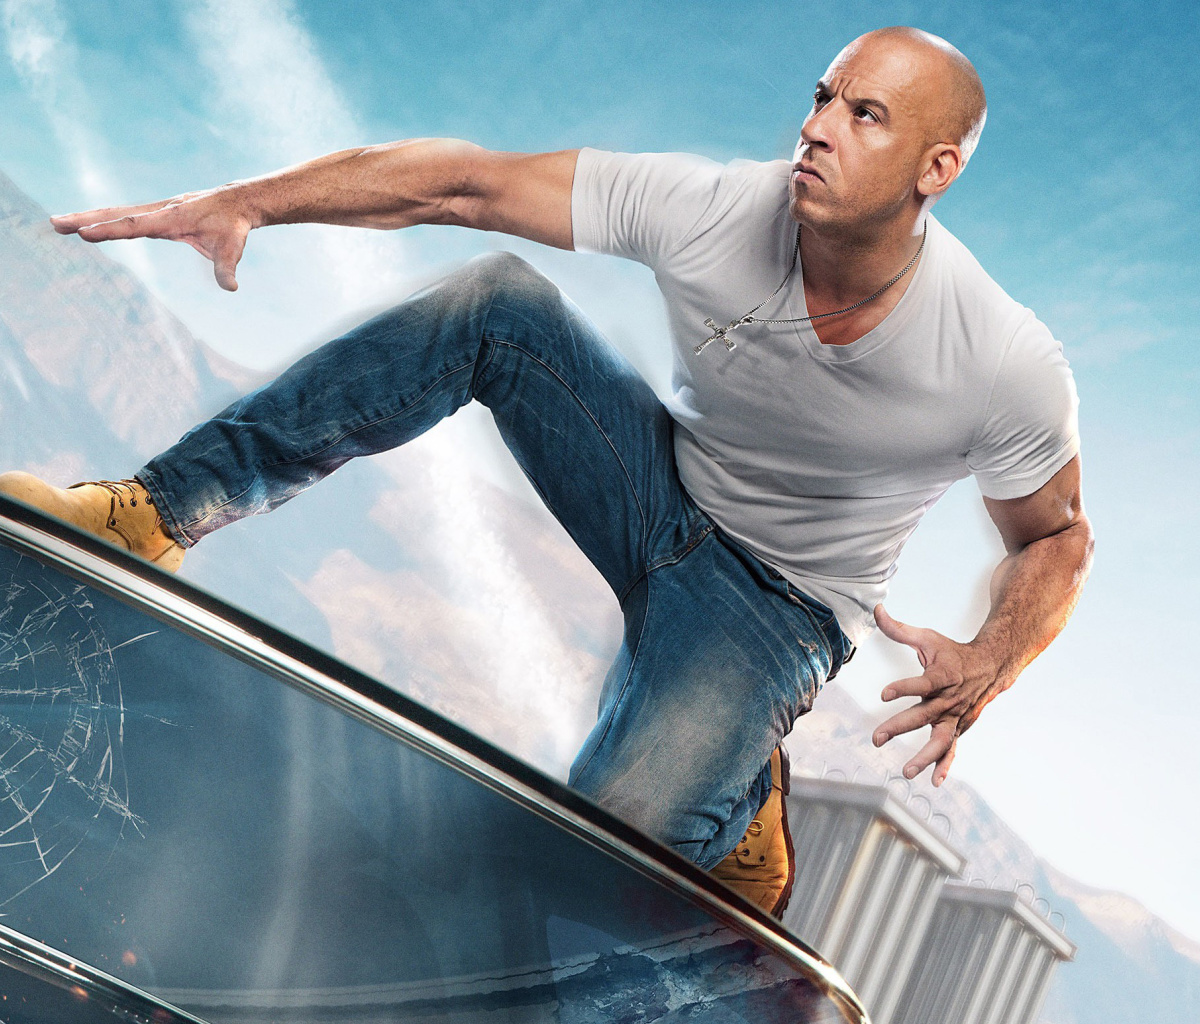 Fast & Furious Supercharged Poster with Vin Diesel wallpaper 1200x1024